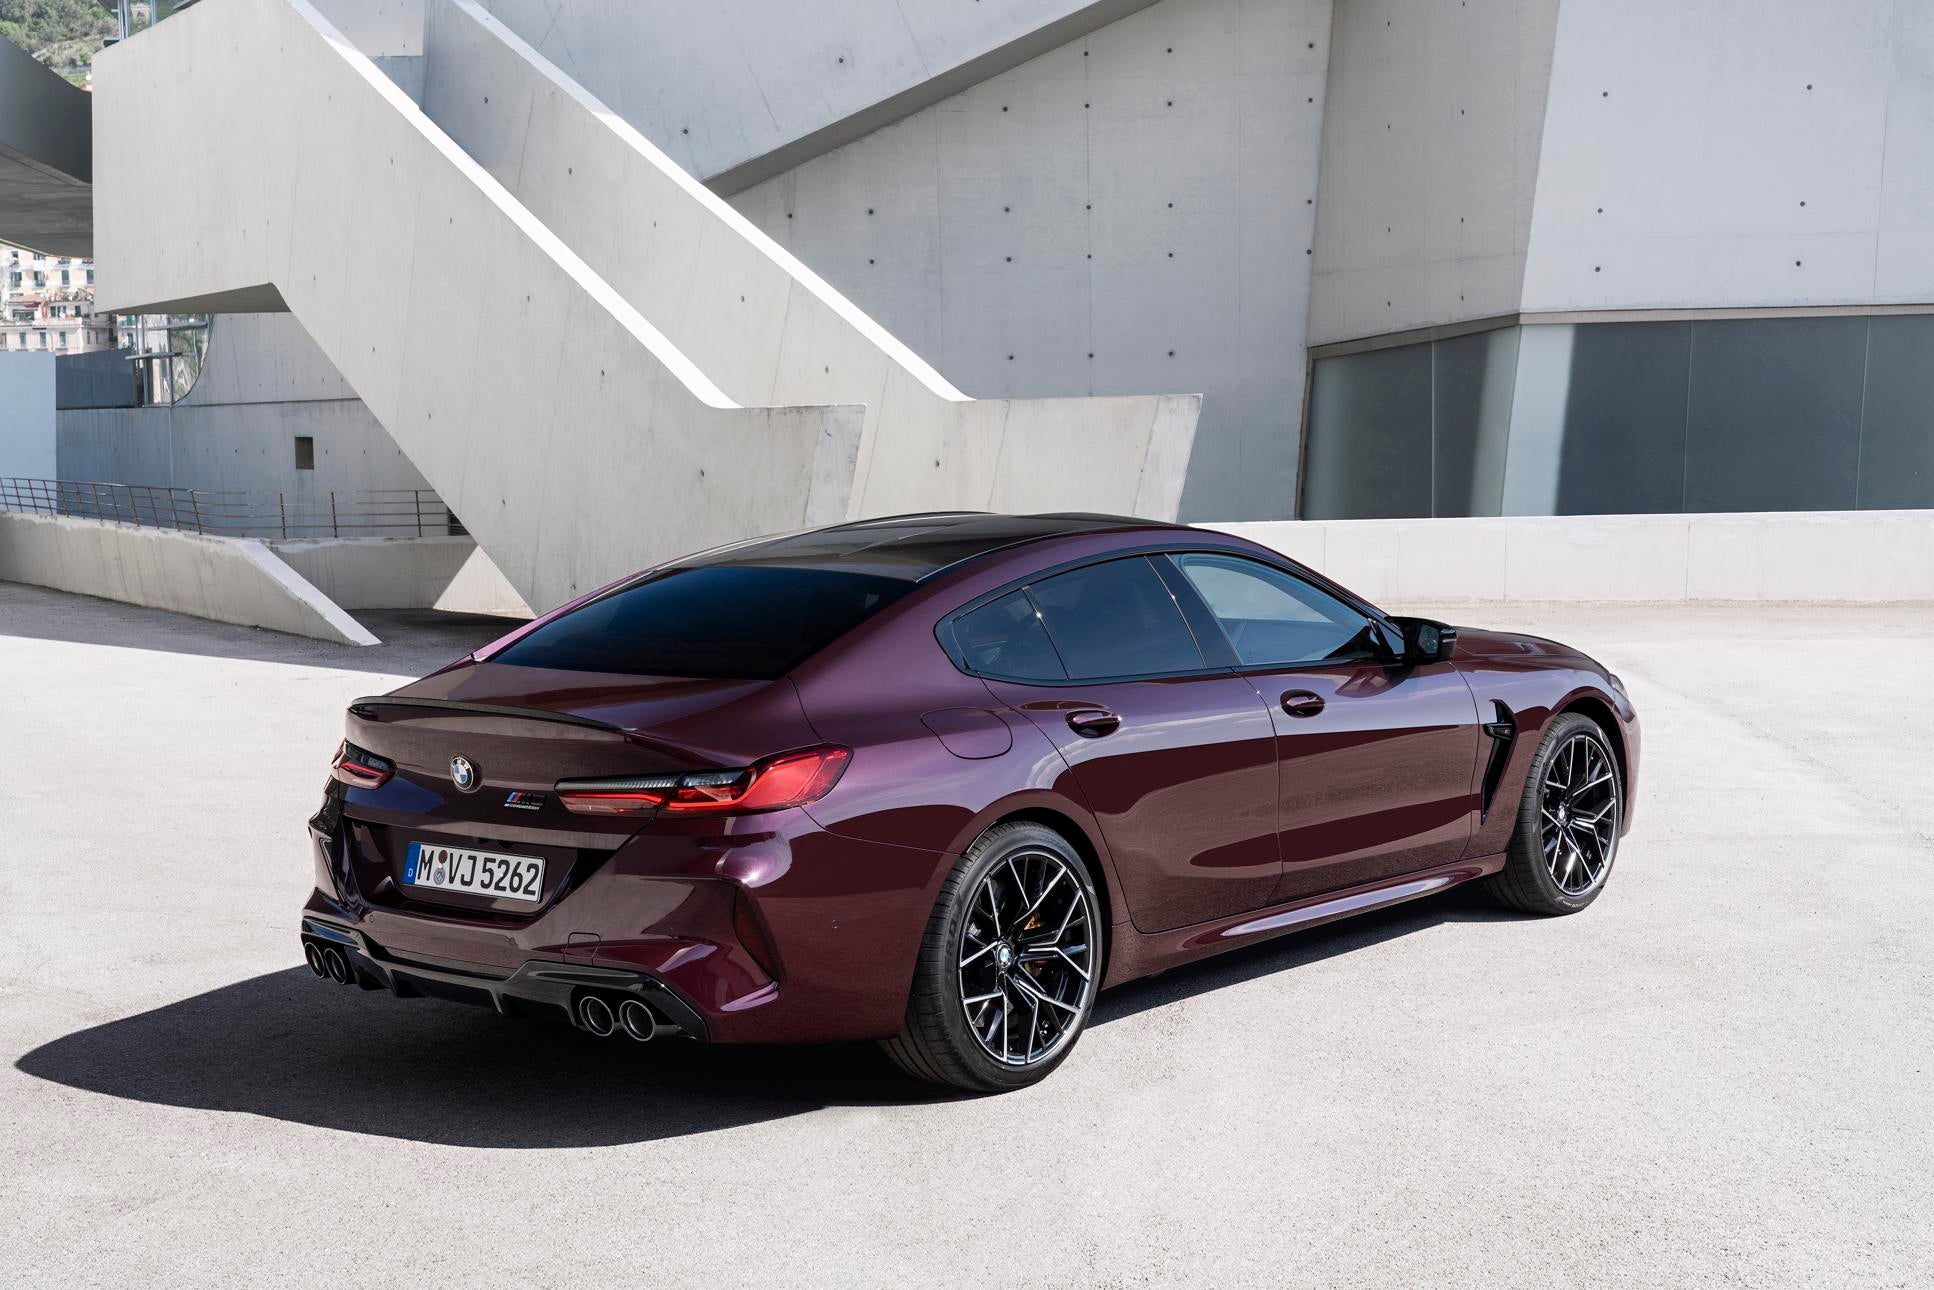 The Bmw M8 Gran Coupe Is A Sublime Tourer With 600 Hp